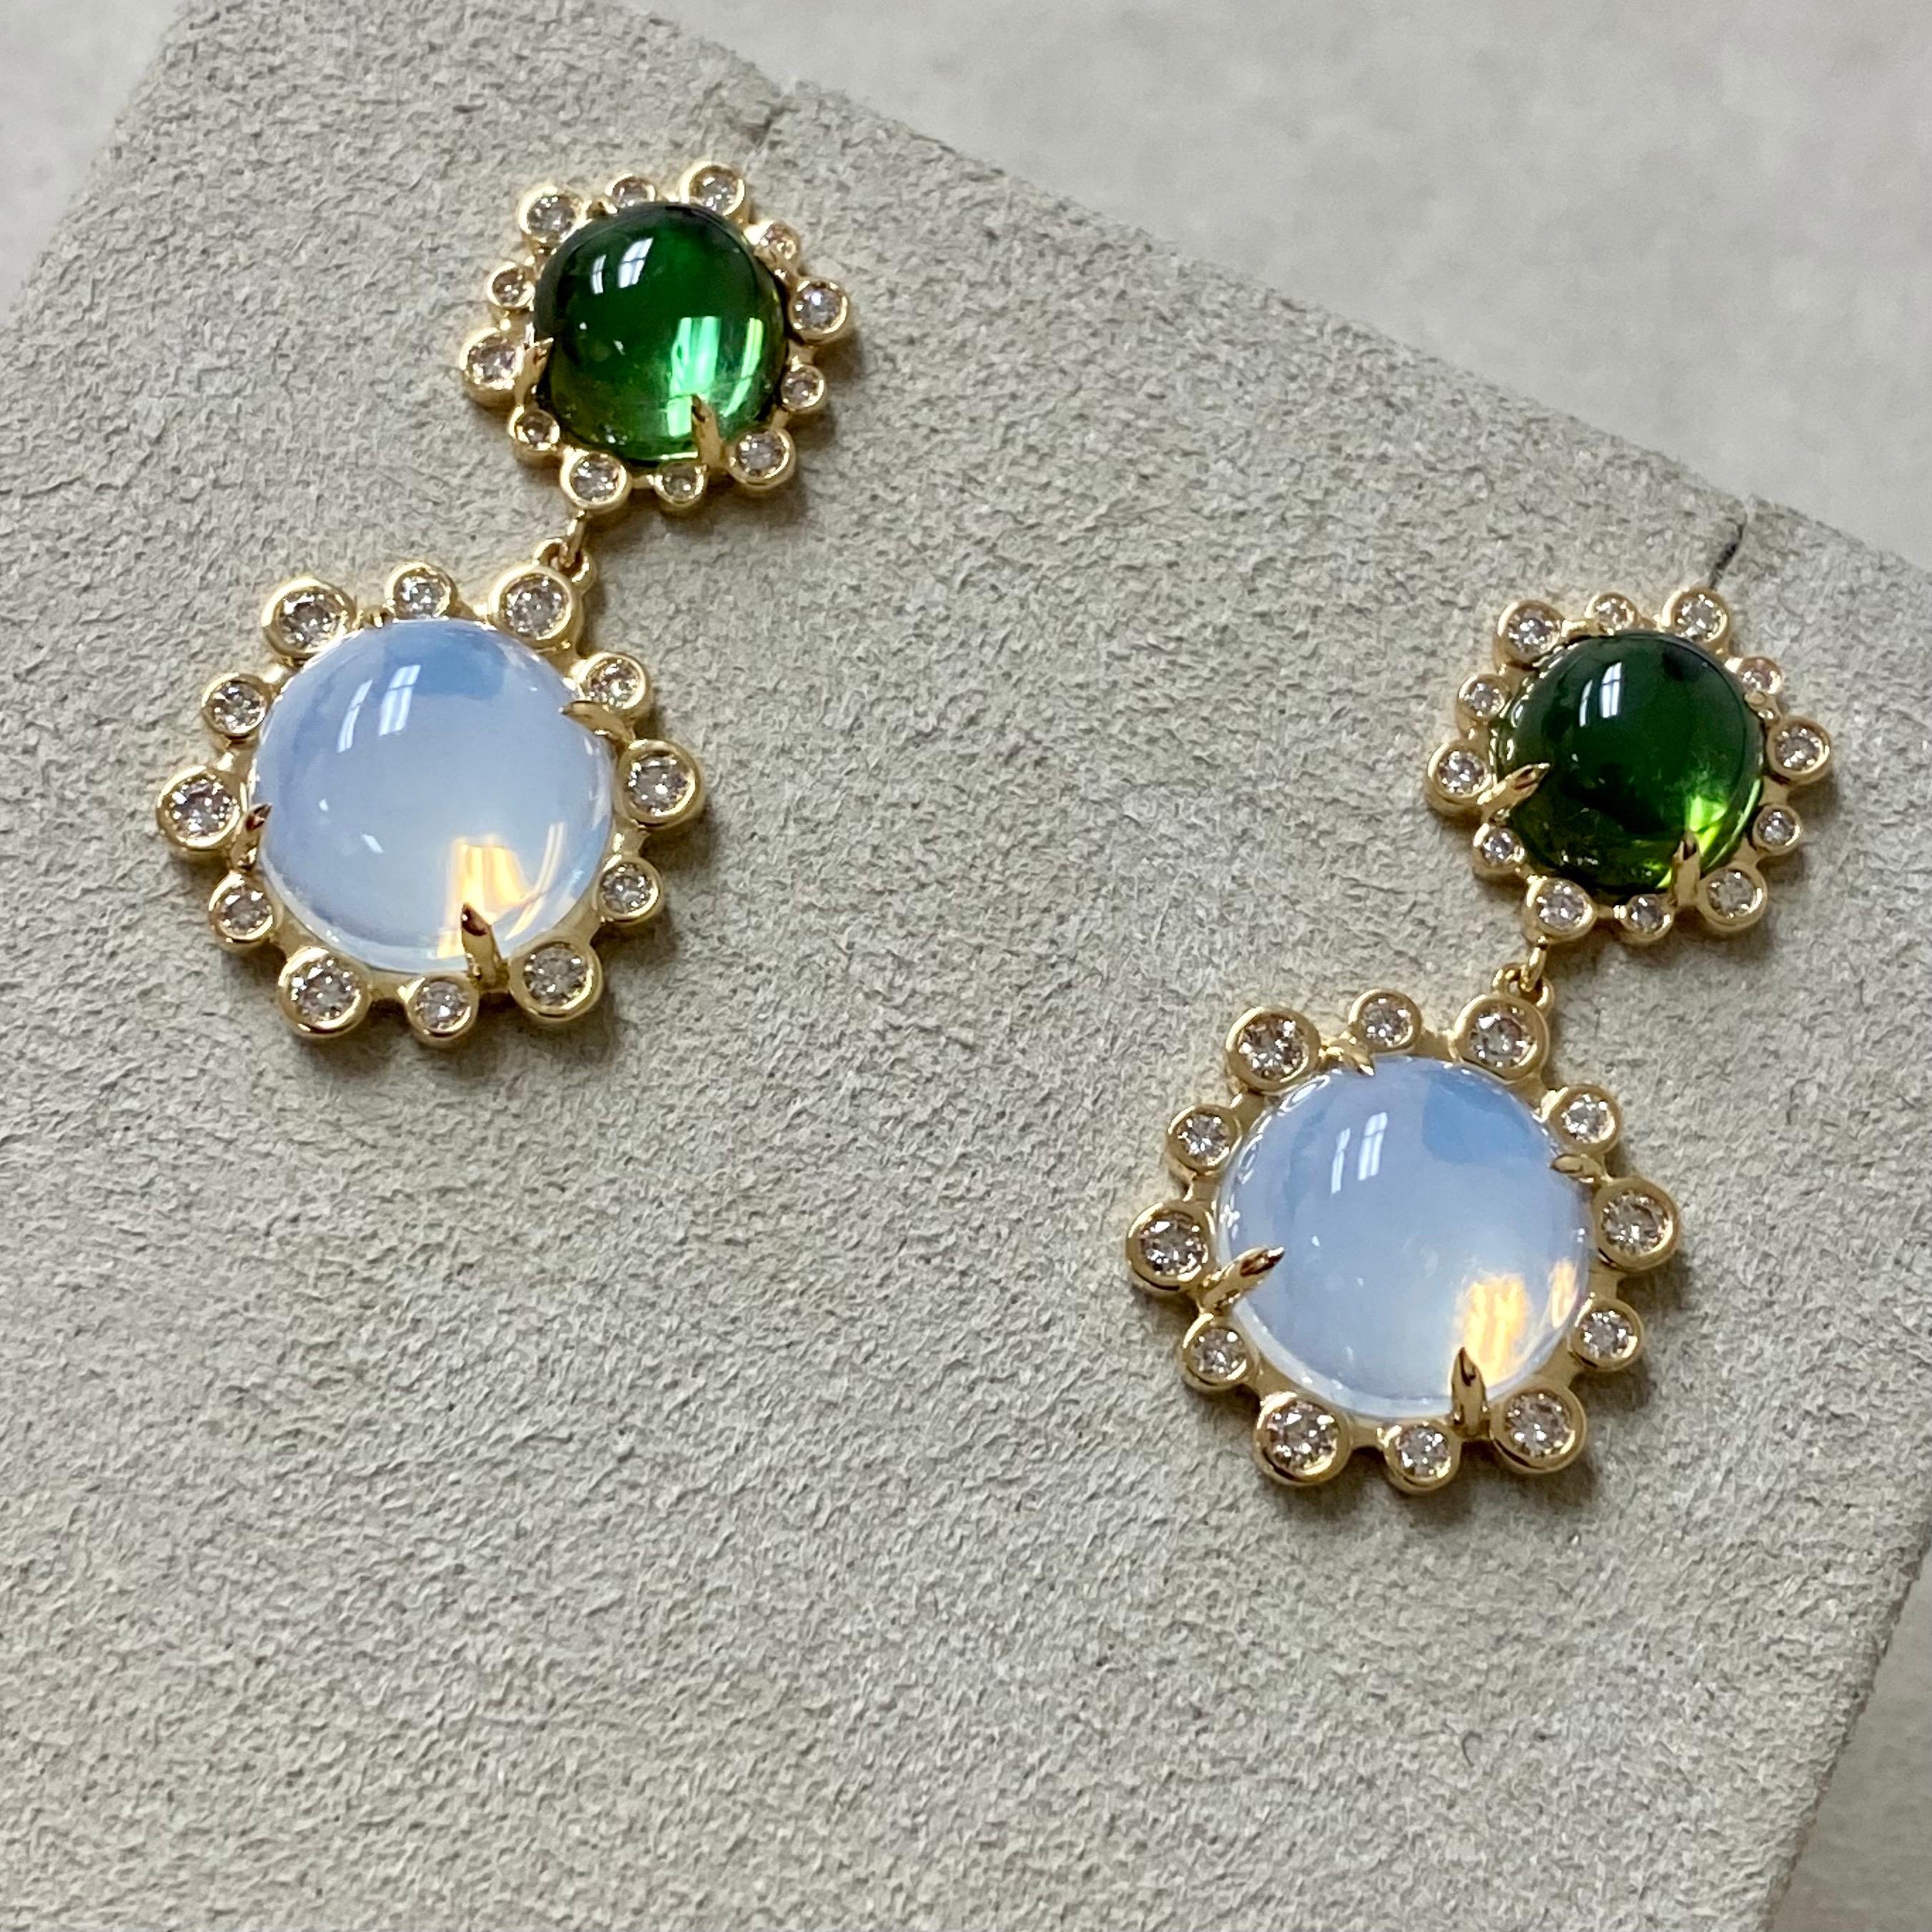 Created in 18 karat yellow gold
Green Tourmaline 5.5 carats approx.
Moon Quartz 9 carats approx.
Diamonds 0.80 carat approx.
Limited Edition

Introducing the limited edition Candy Blue Topaz and Moon Quartz Earrings, crafted in luxurious 18 karat